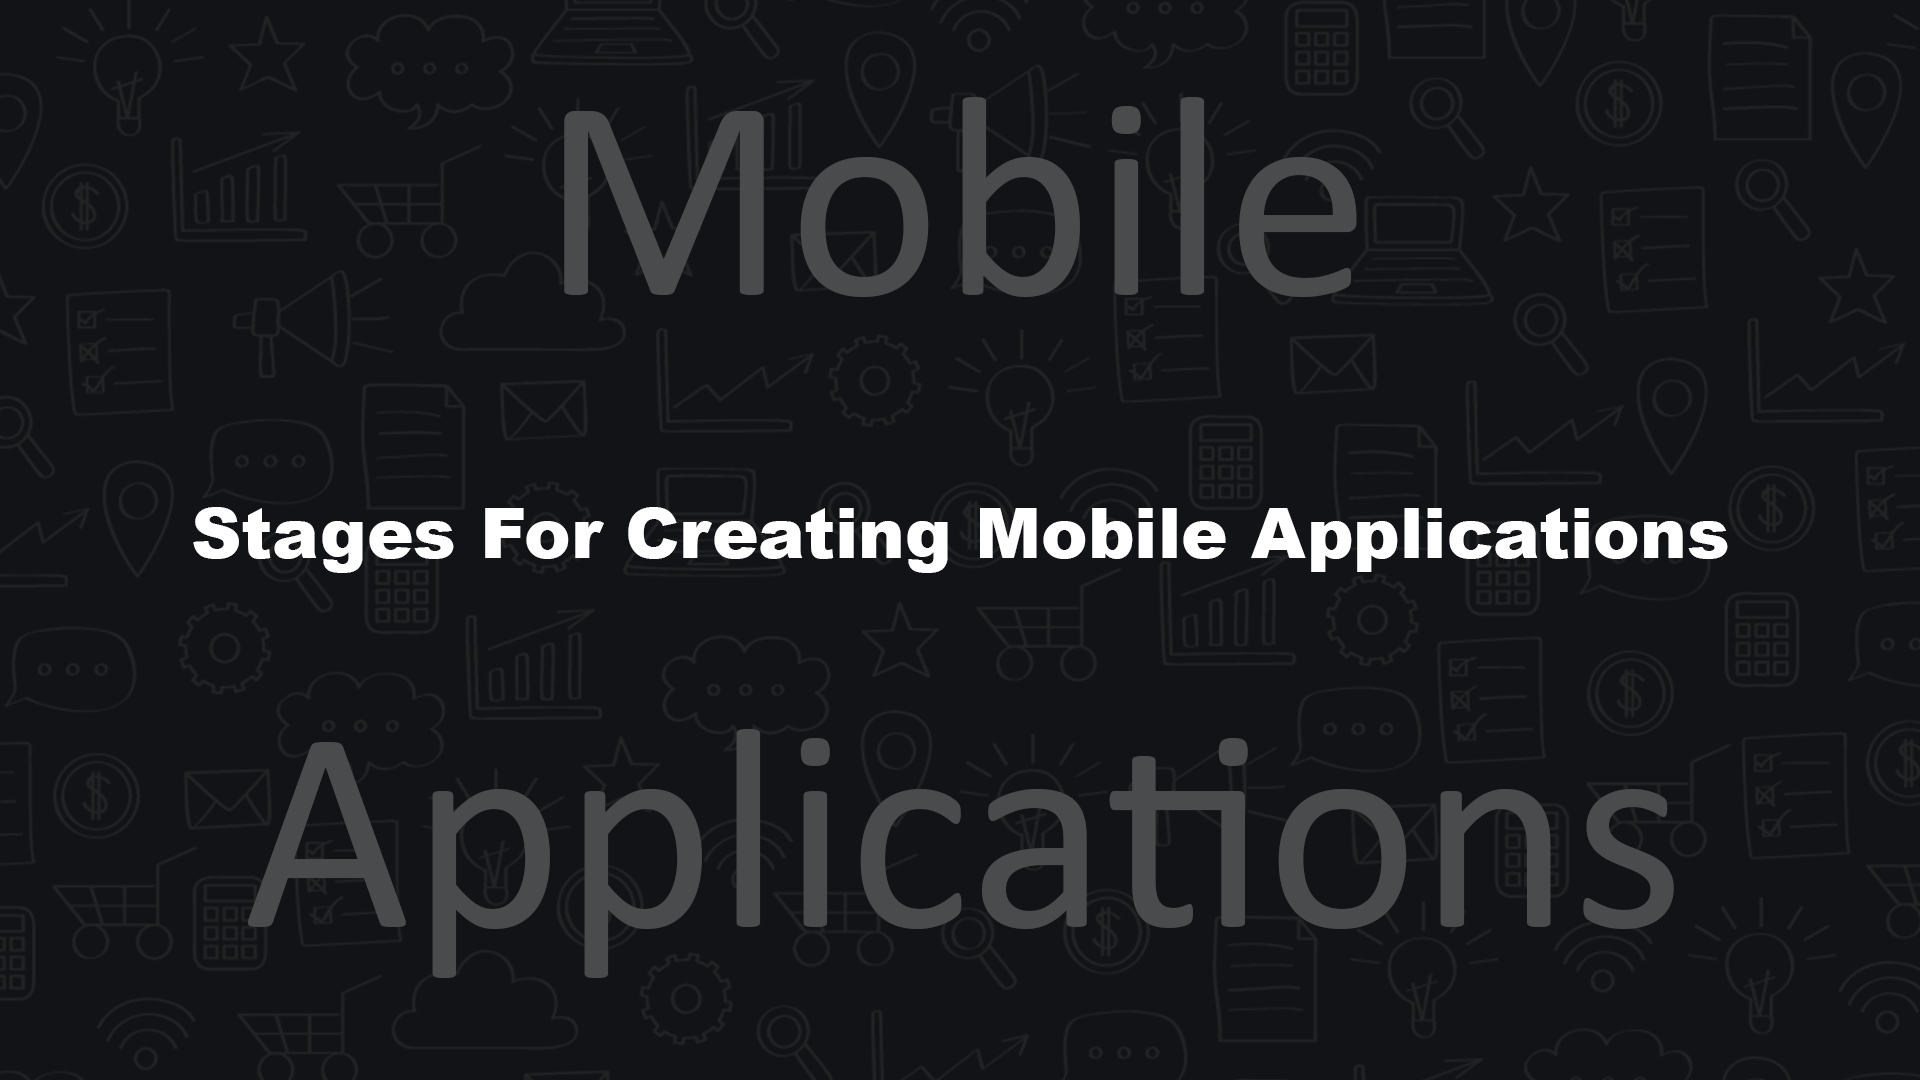 Stages For Creating Mobile Applications